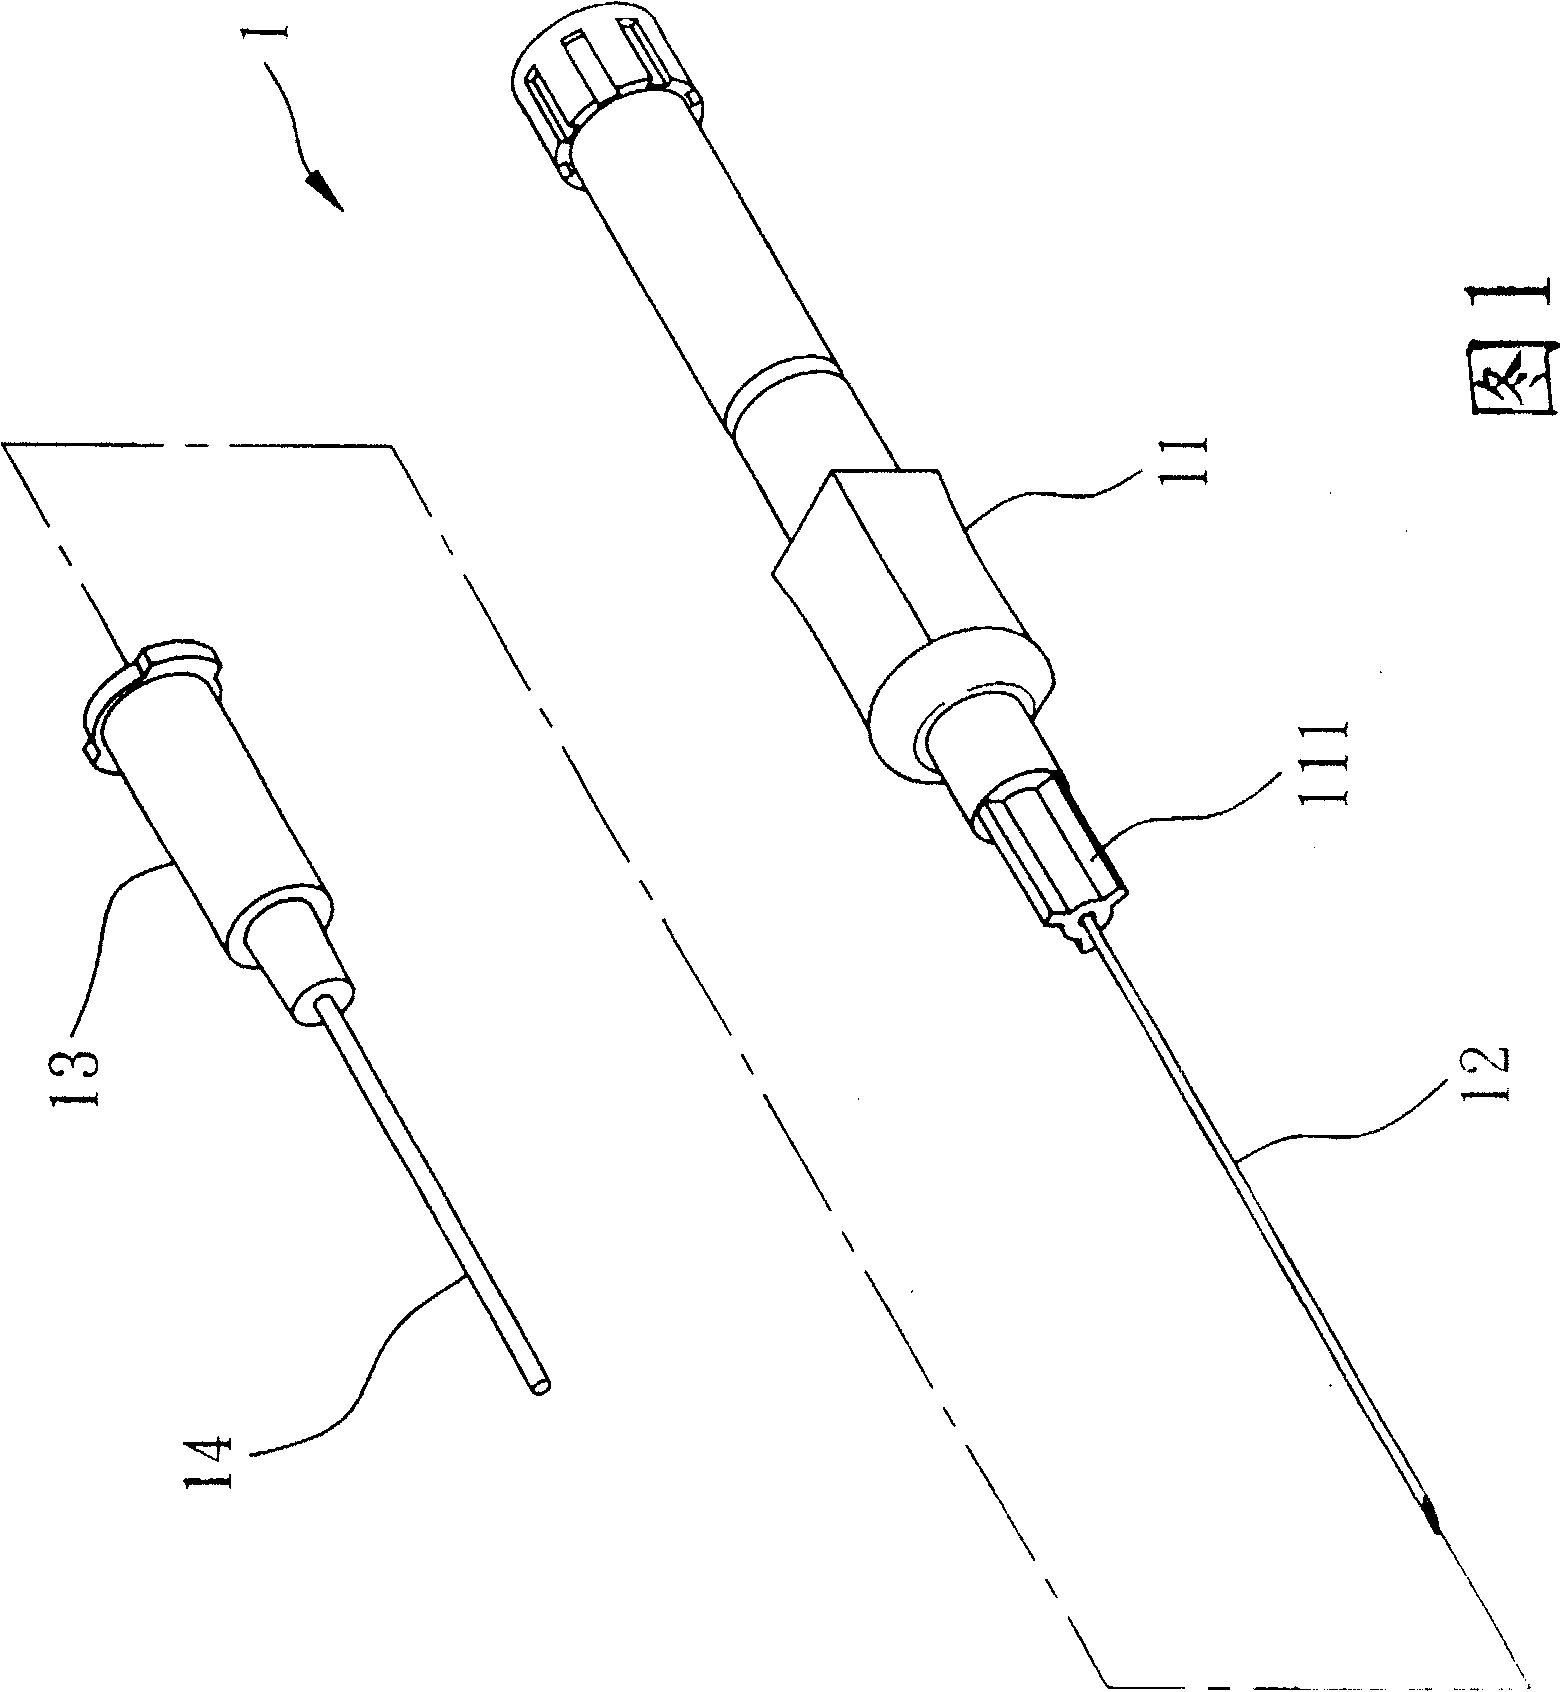 Safe apparatus with injection and hemospasia function